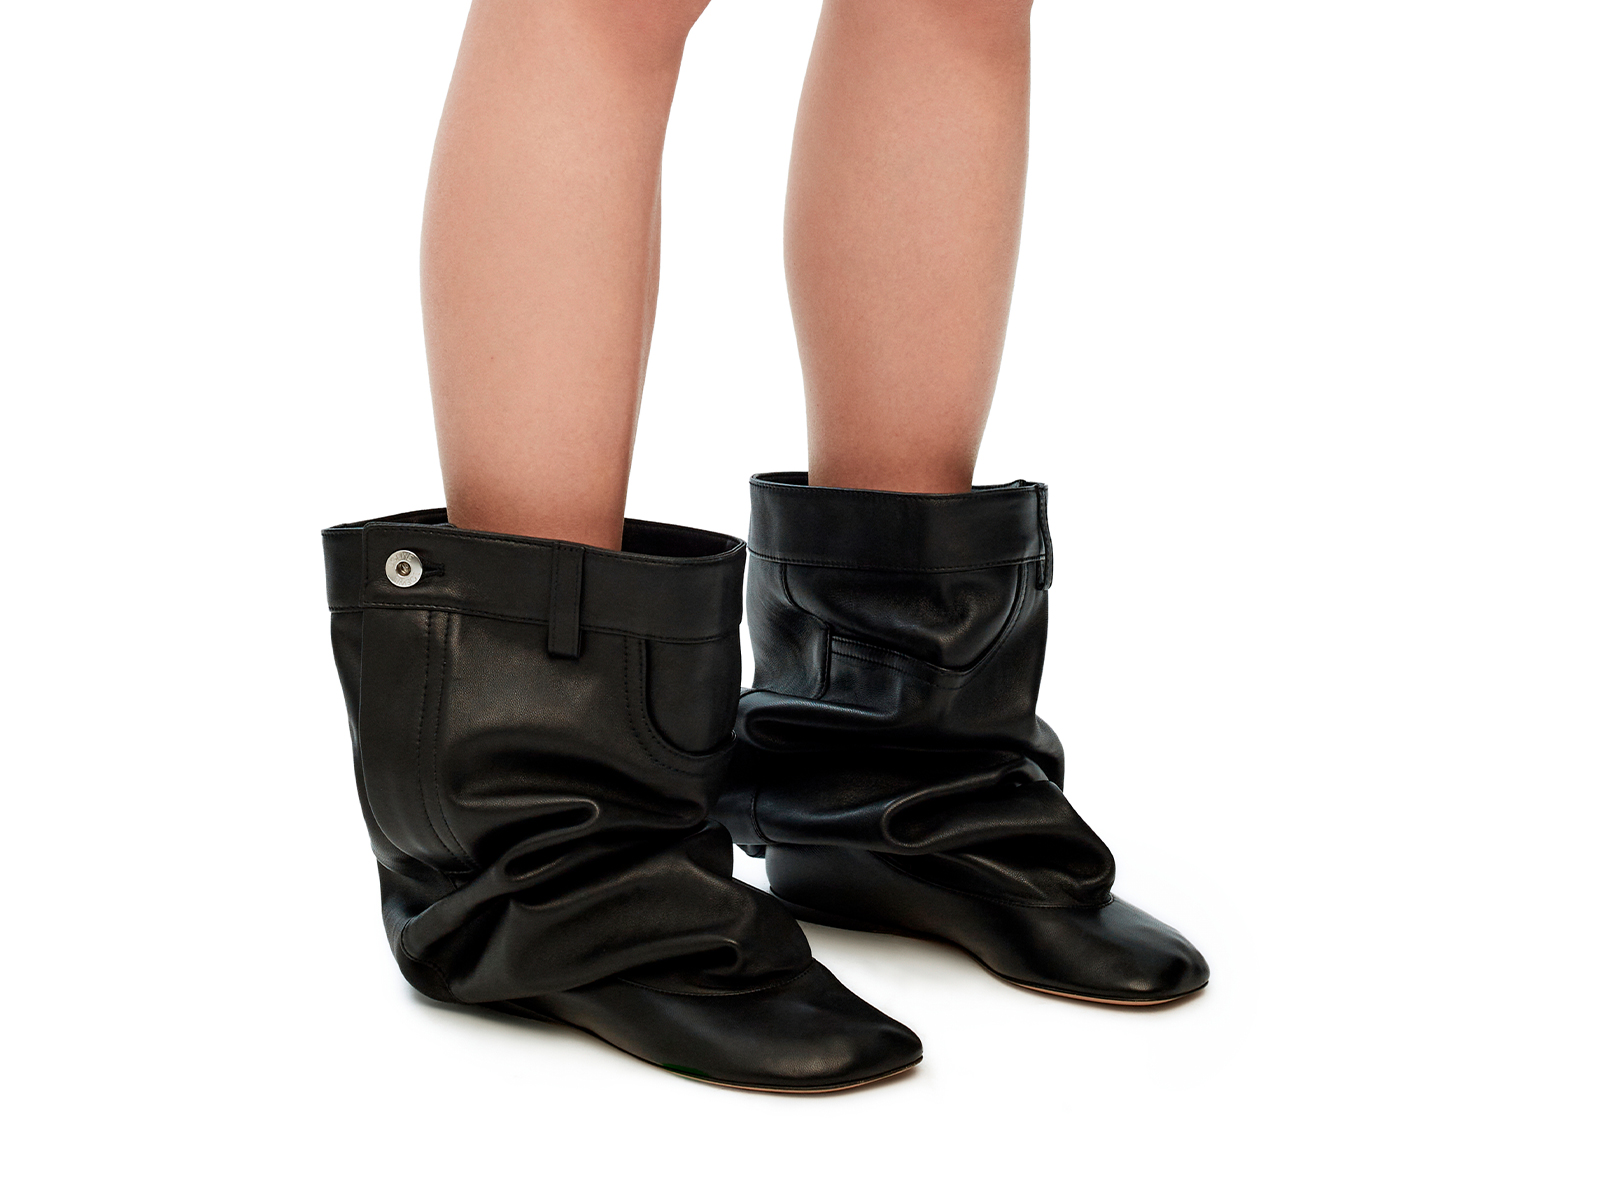 Black Rubber Boots for Stuffed Animals